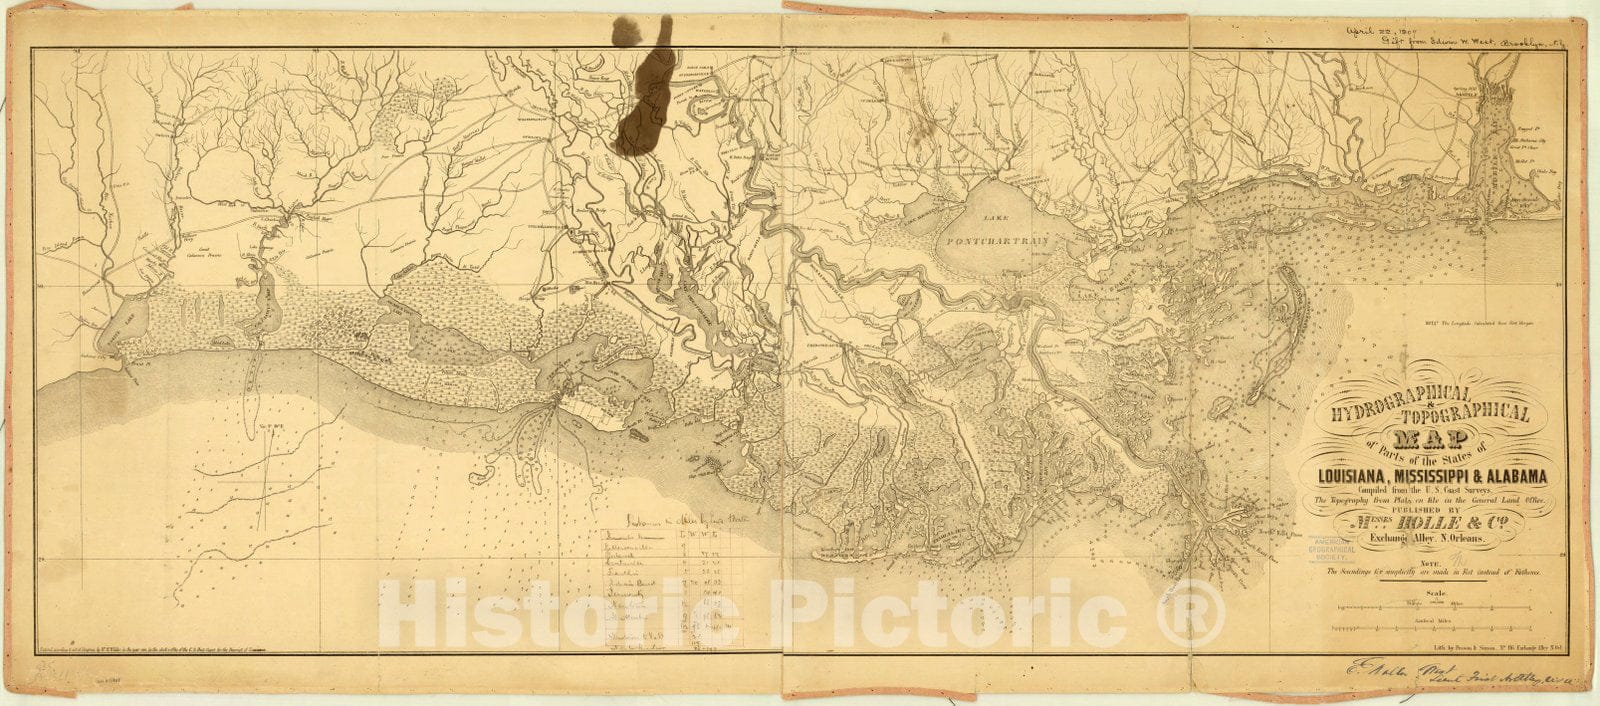 Map : Louisiana 1861, Hydrographical & topographical map of parts of the states of Louisiana, Mississippi & Alabama , Antique Vintage Reproduction